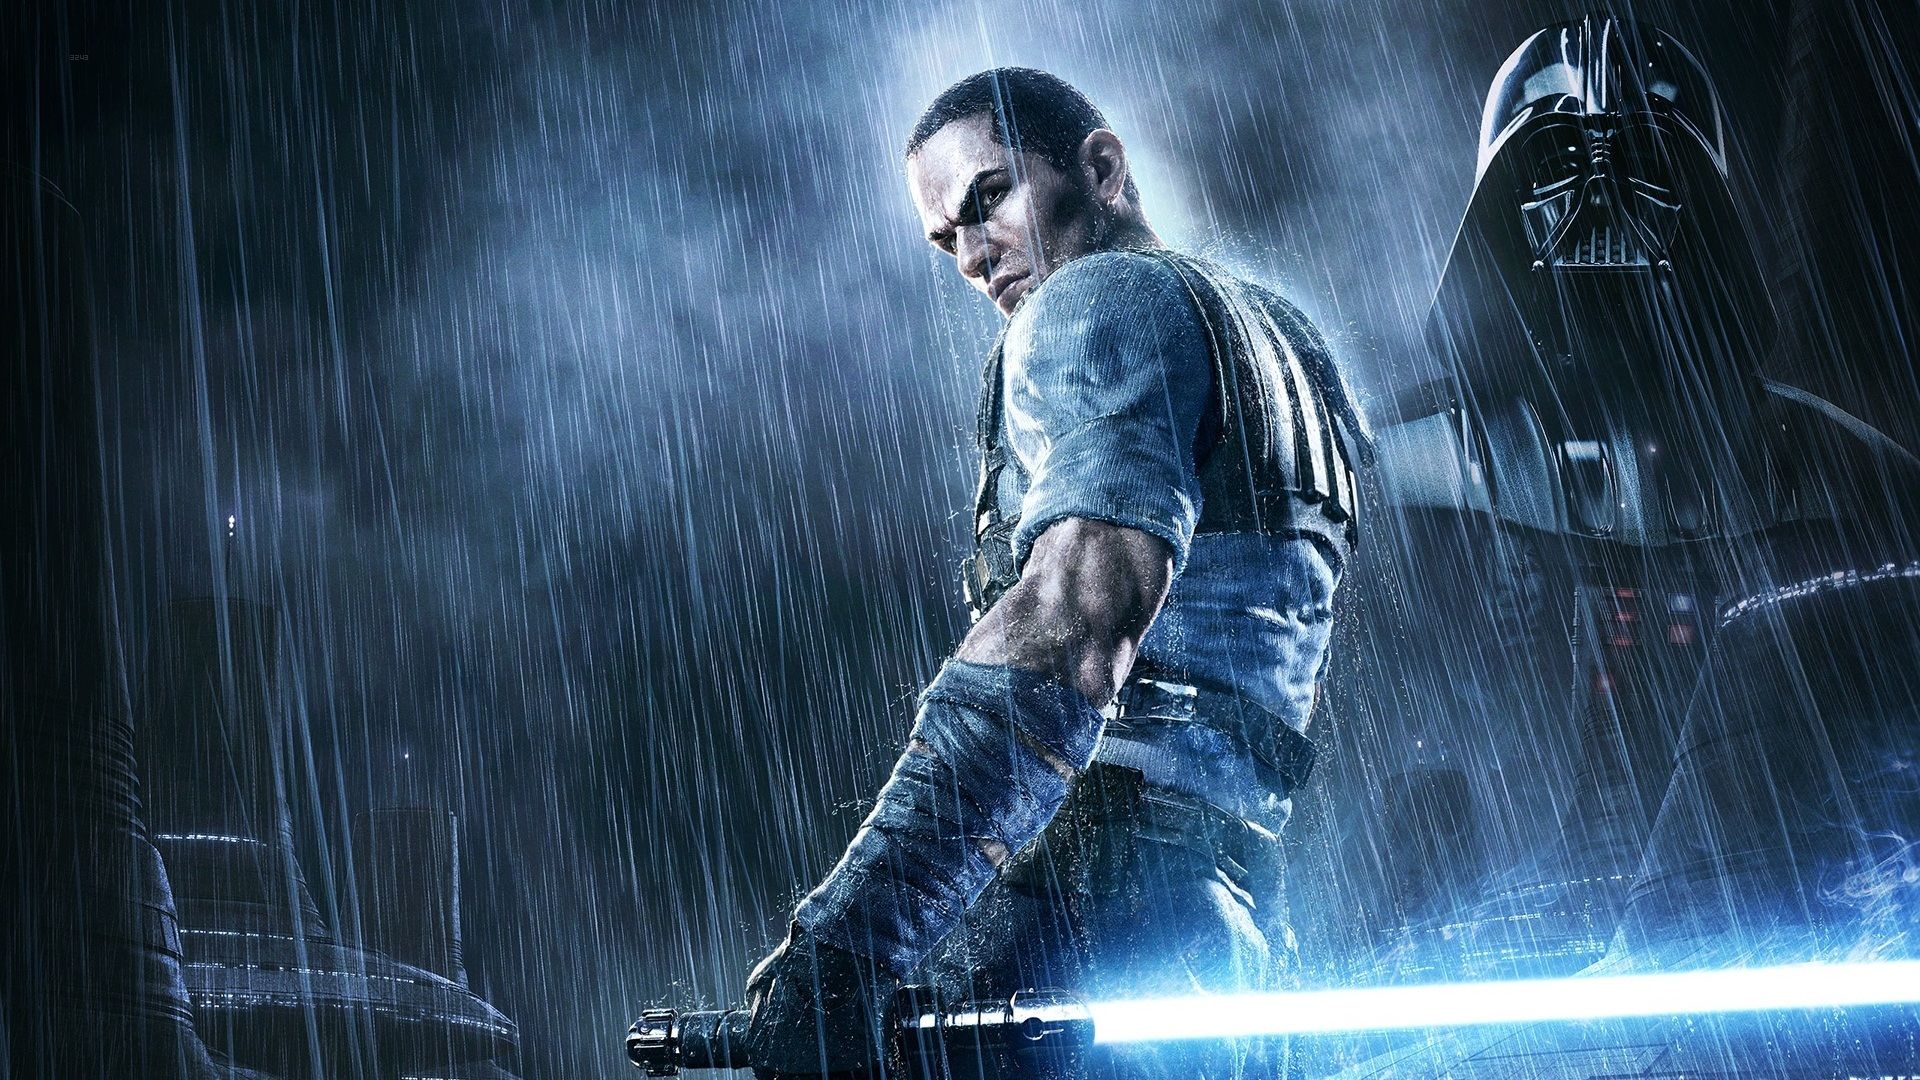 Star Wars the Force Unleashed Wallpaper. Star Wars the Force Unleashed Wallpaper, Sonic Unleashed Wallpaper and Scooby Doo 2 Monsters Unleashed Wallpaper